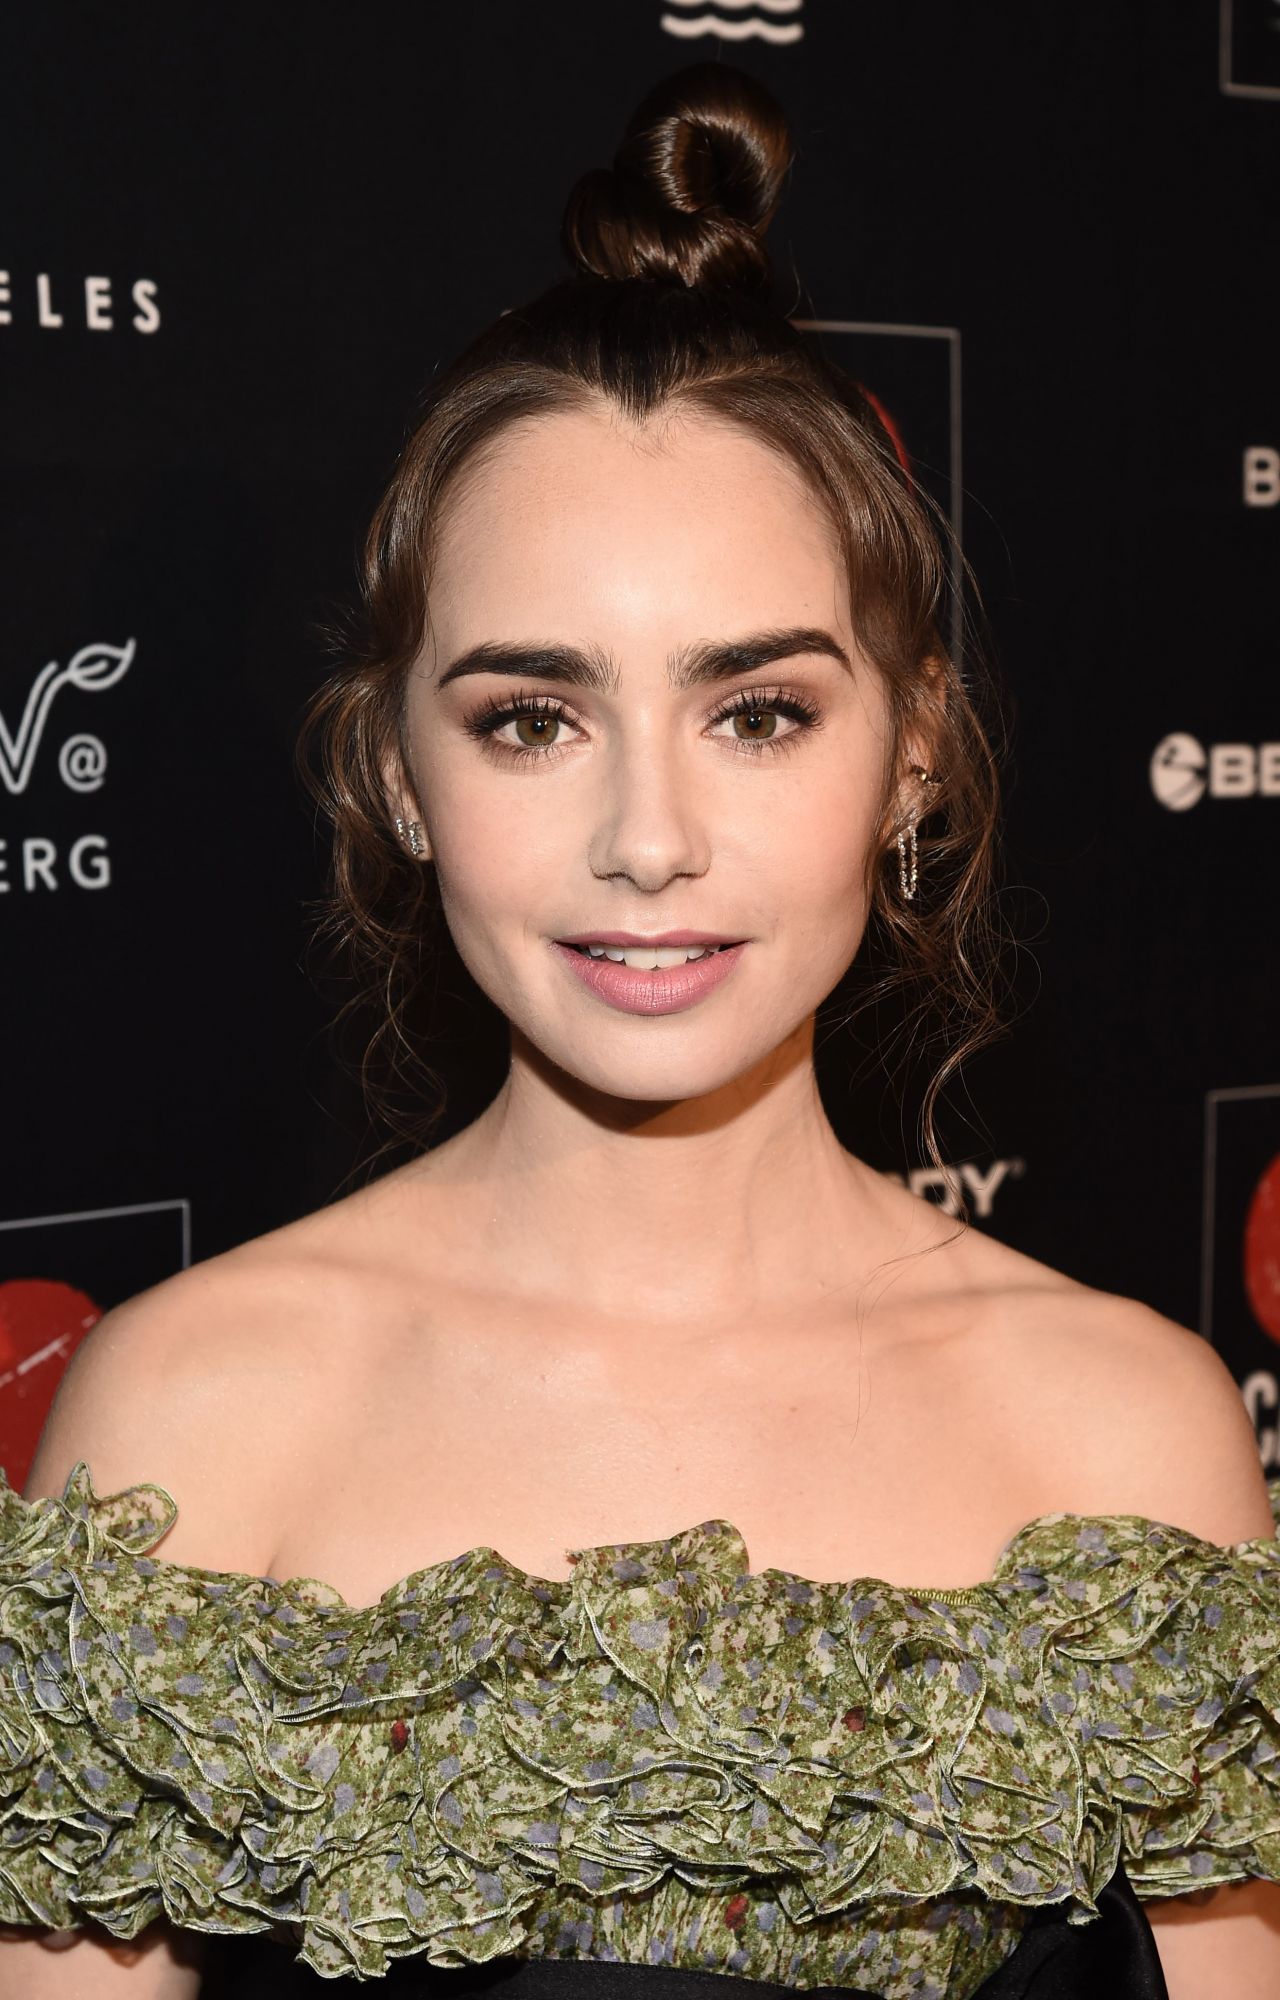 lily-collins-go-campaign-gala-in-los-angeles-10-20-2018-9.jpg